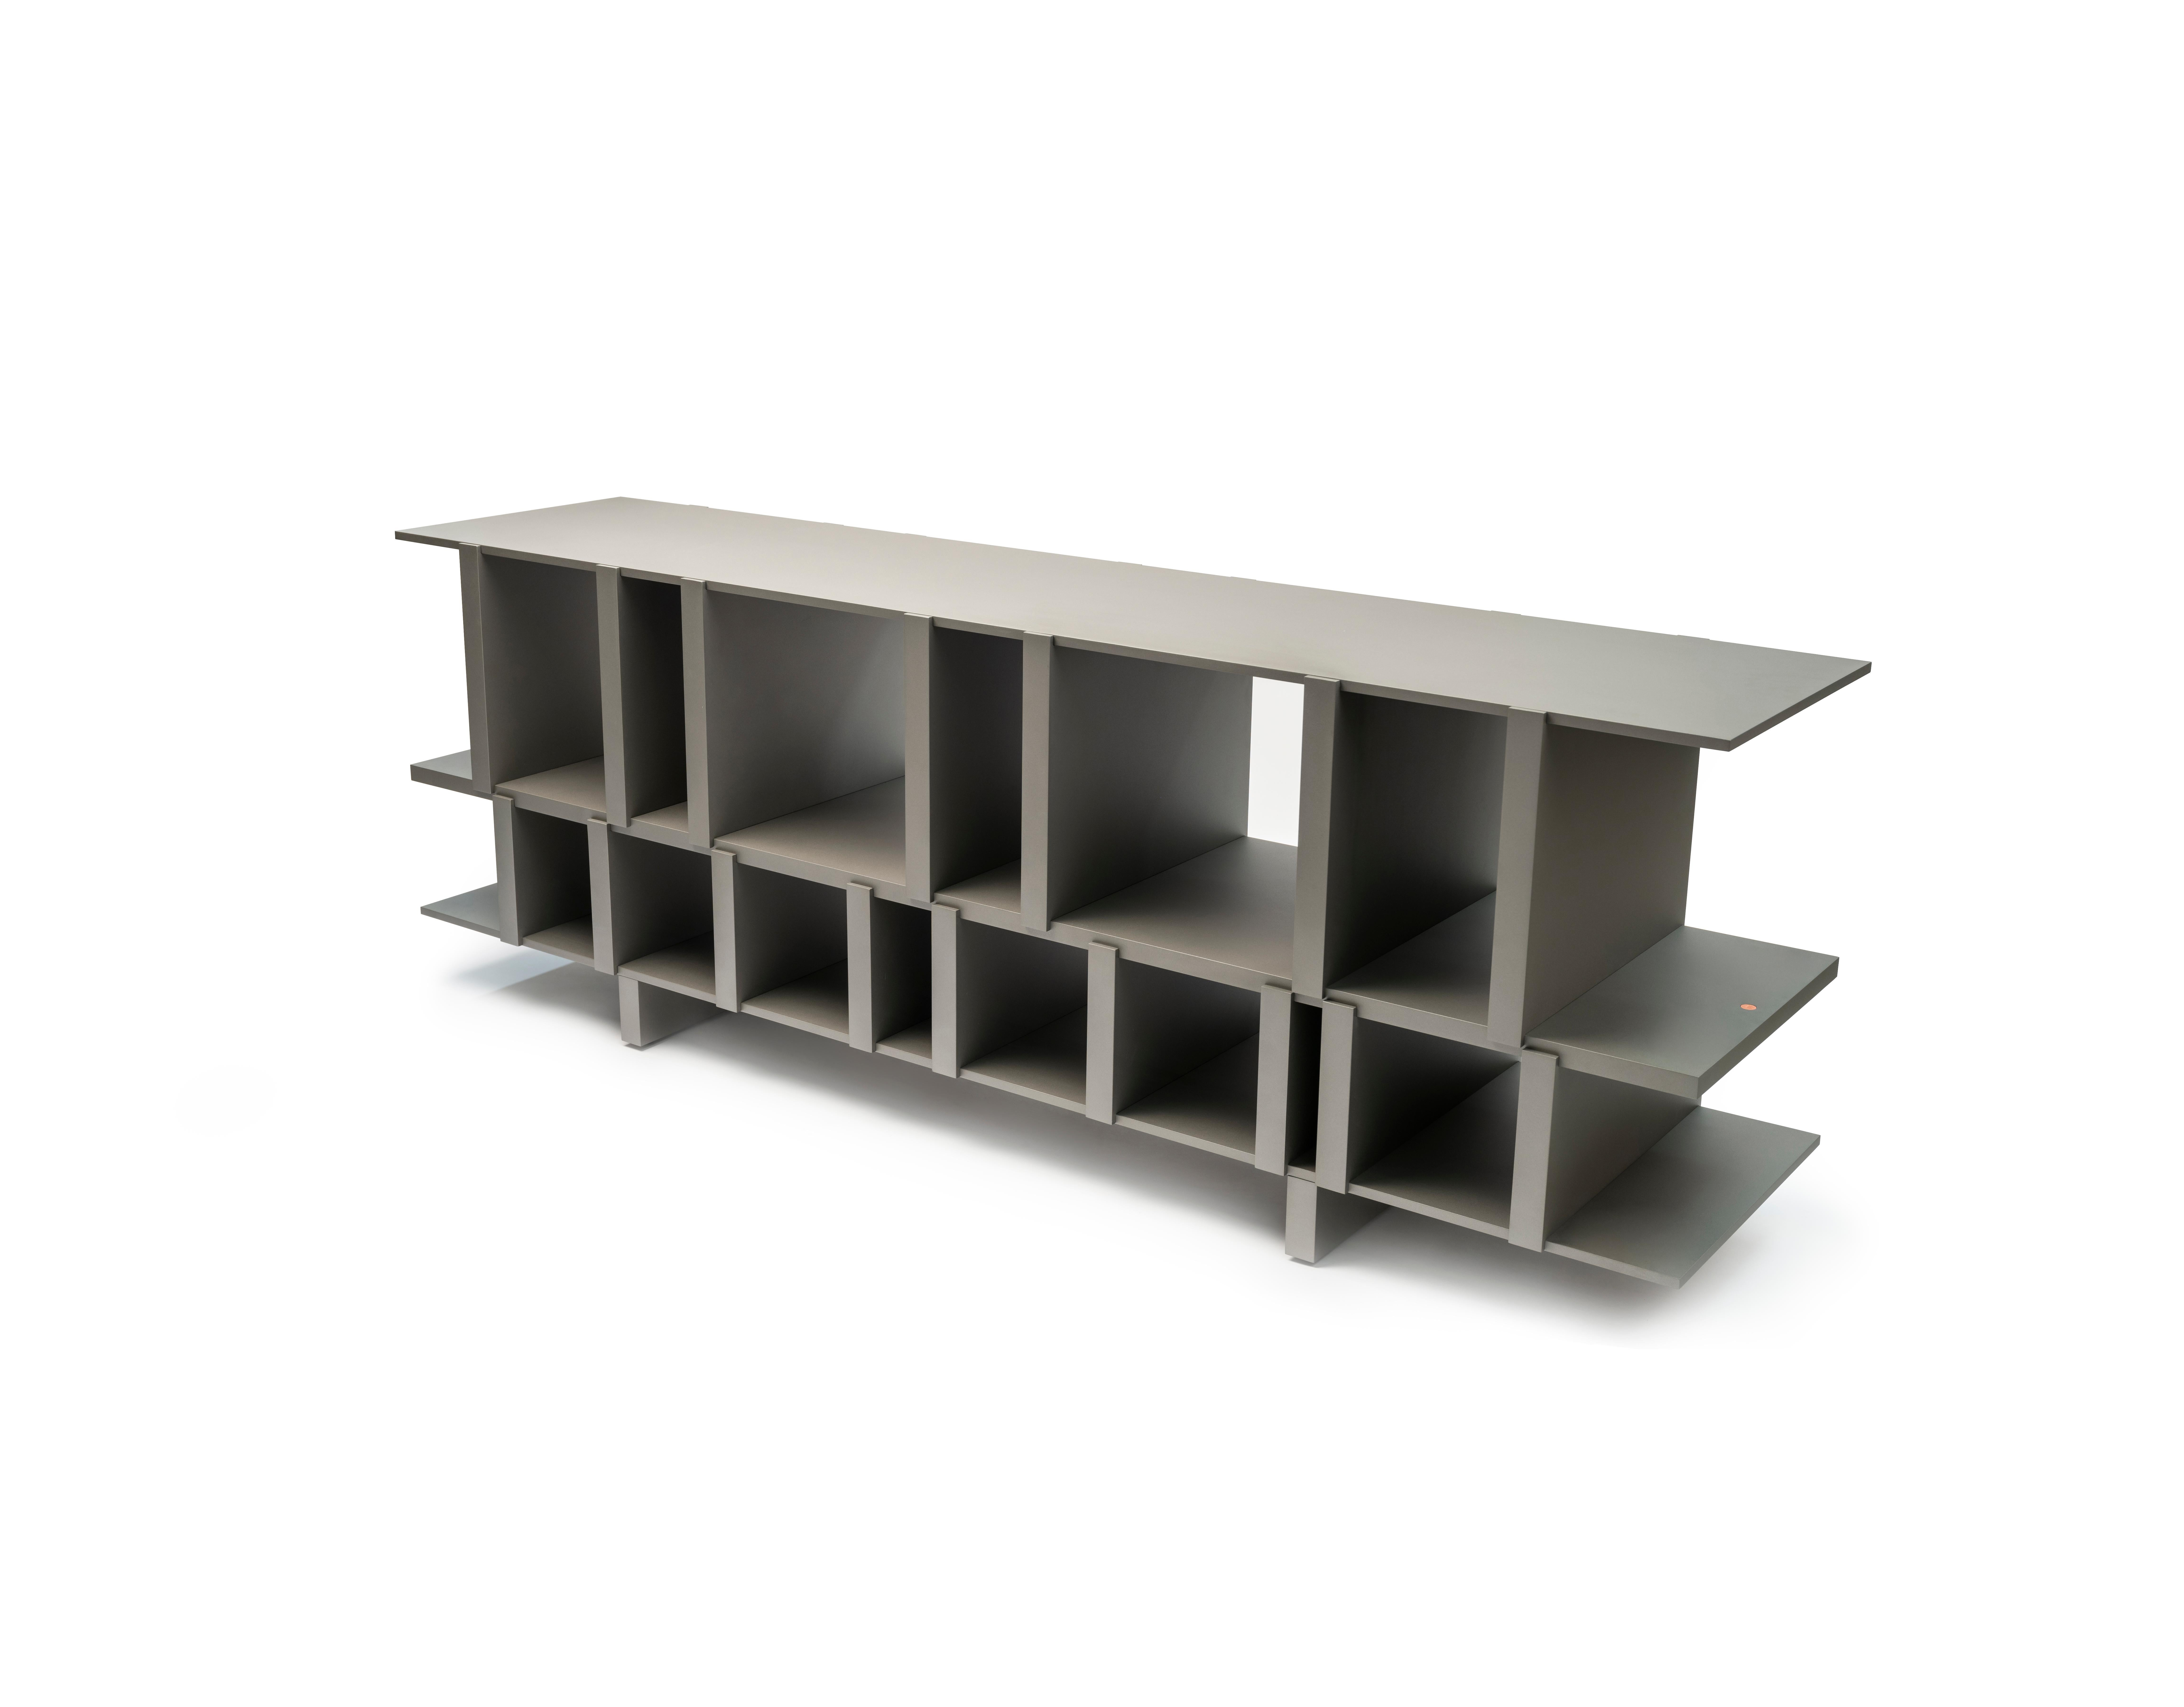 Inspired by optical illusion artworks, the design of Pyrite bookshelf amazes through an unexpected distribution between empty and full spaces and a structure where horizontal and vertical seems to be reversed. The thin lines of the frame aim for